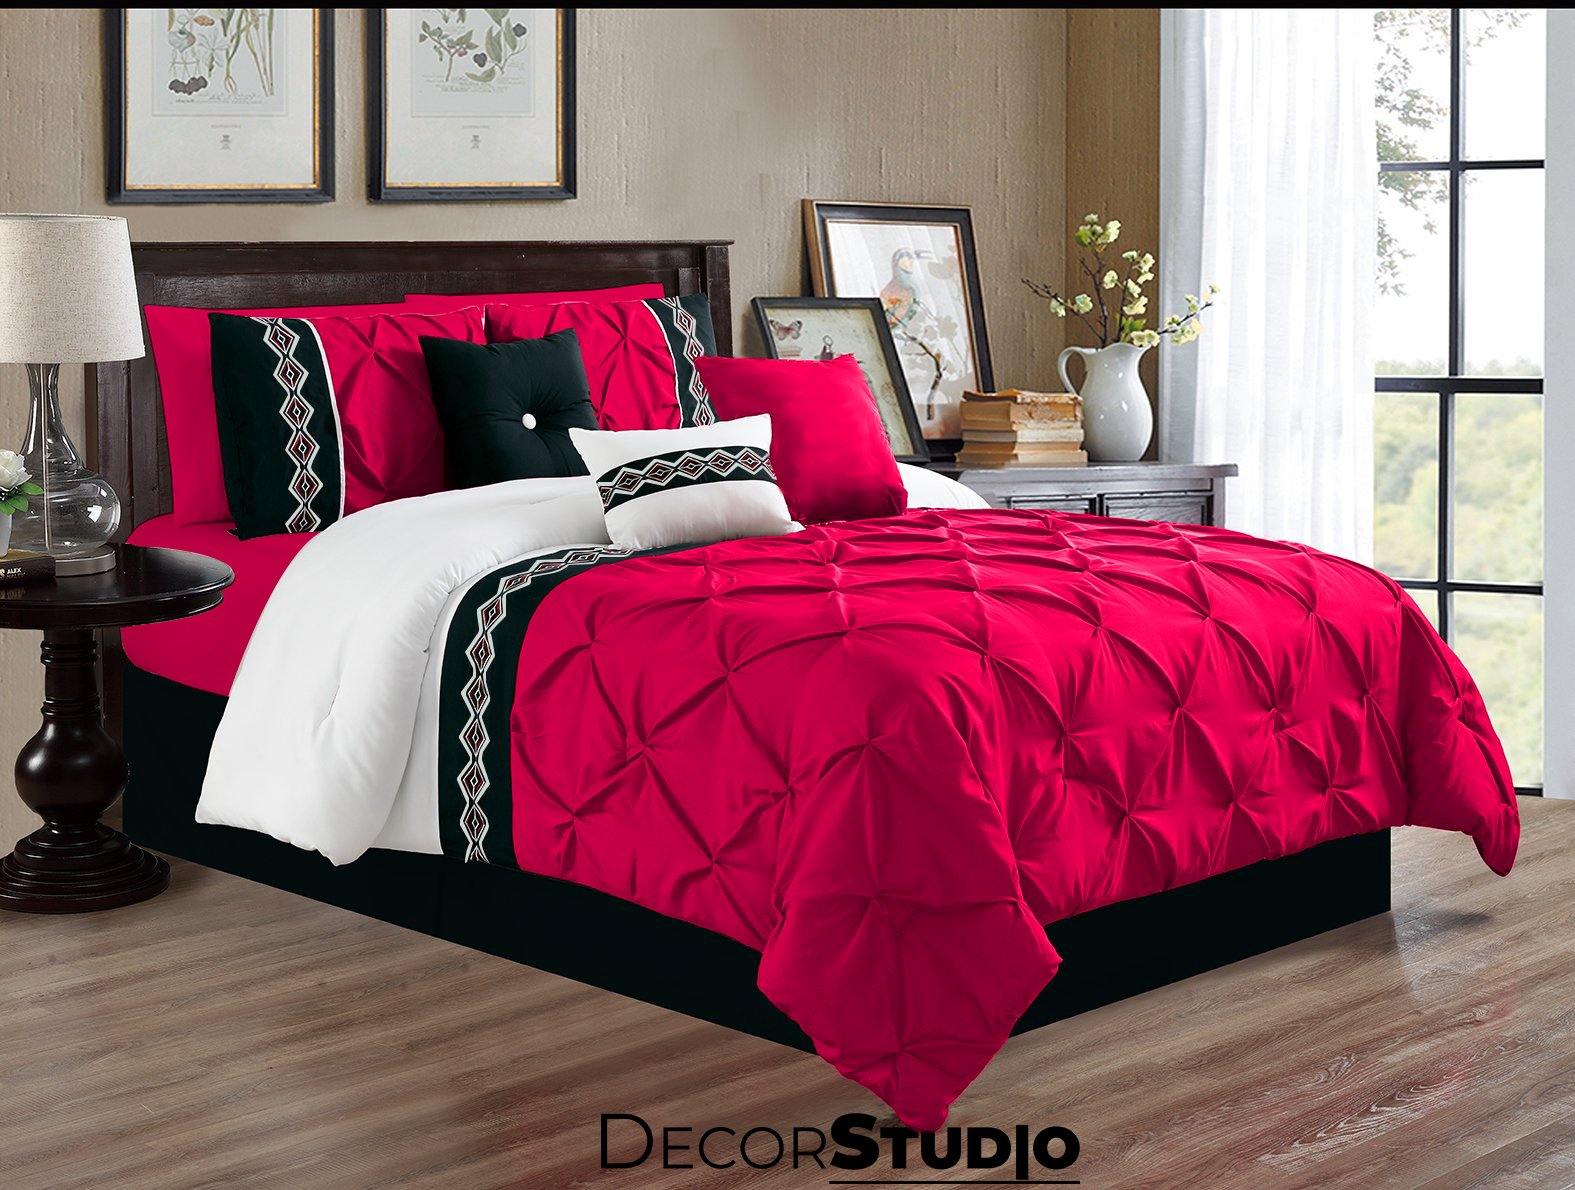 Artistically Embroidered Pintuck Shocking Pink Duvet Covers Set - 8 Pieces - DecorStudio -